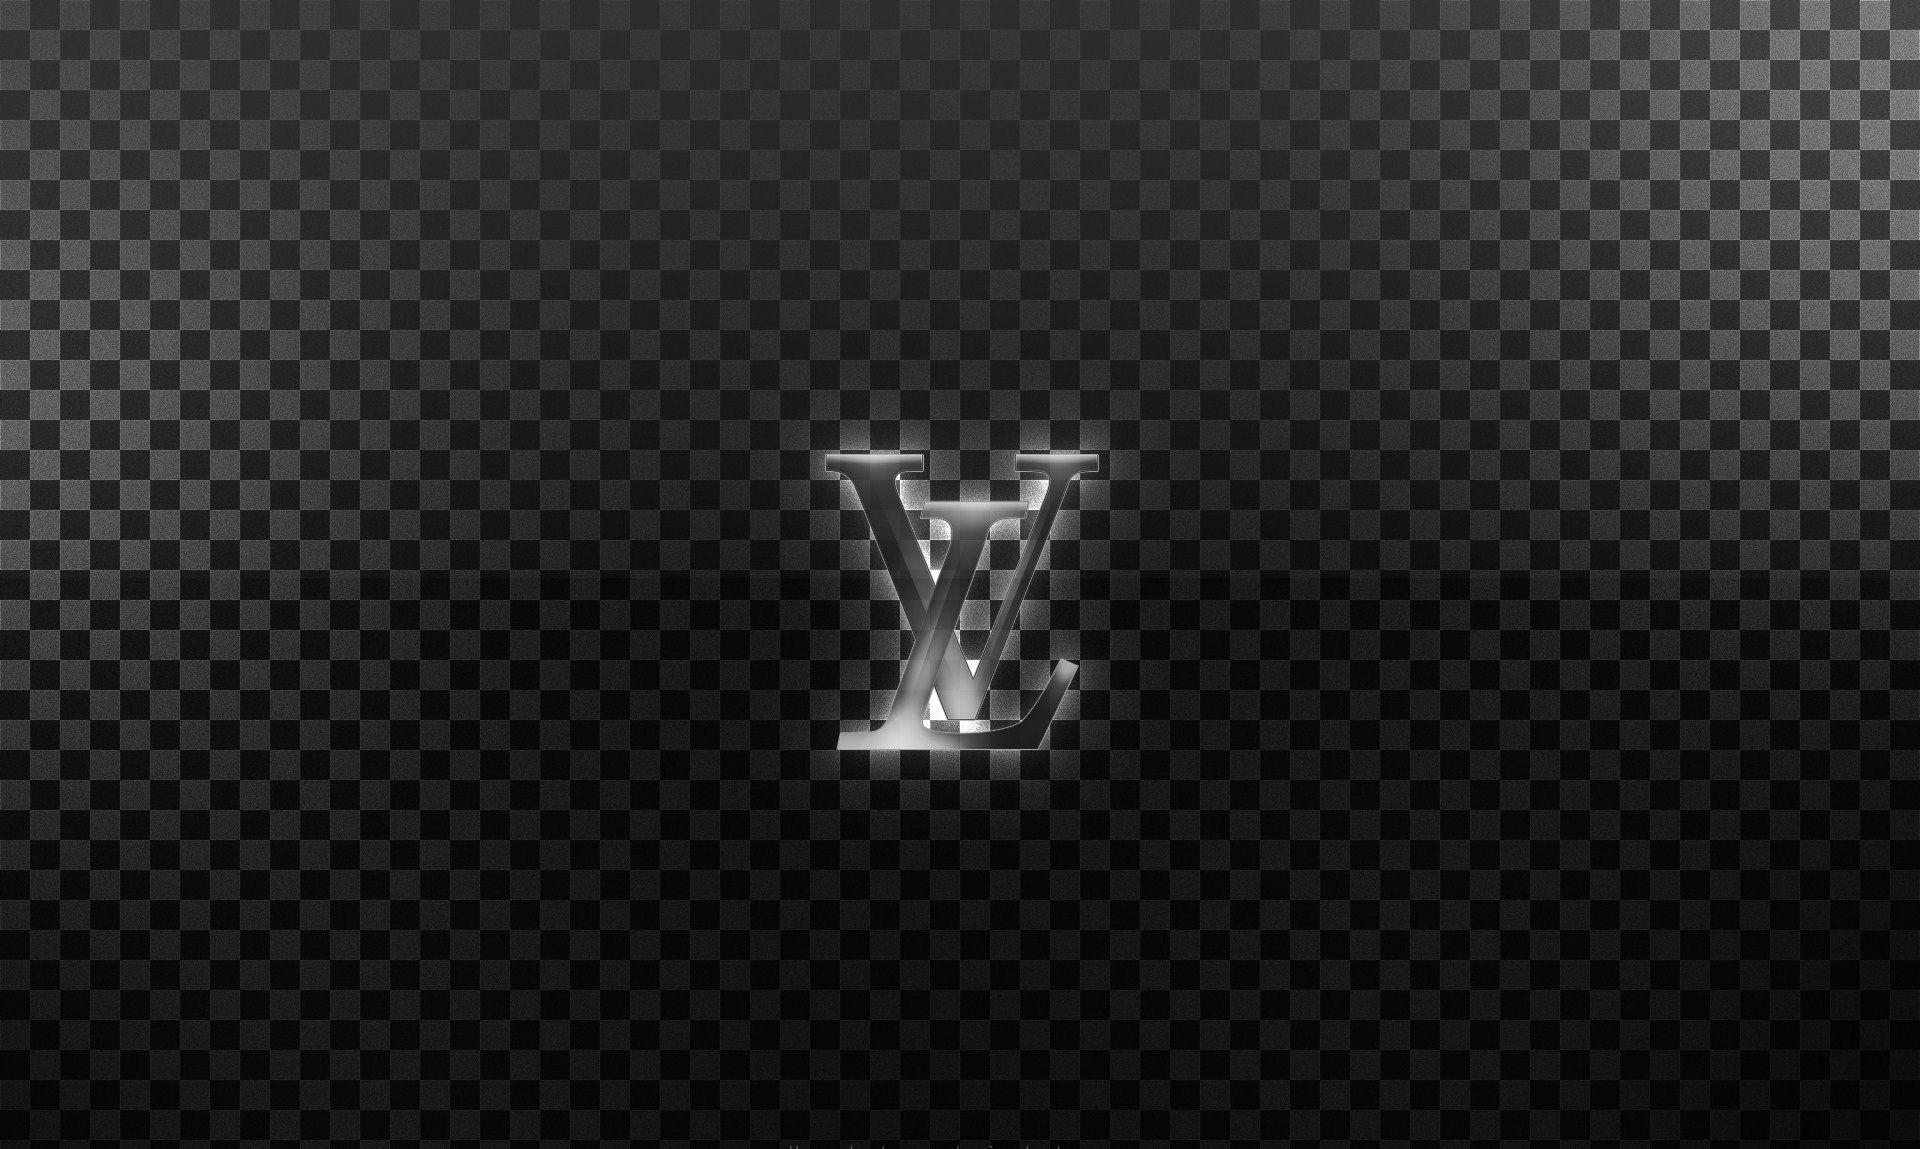 Lv Iphone Wallpapers